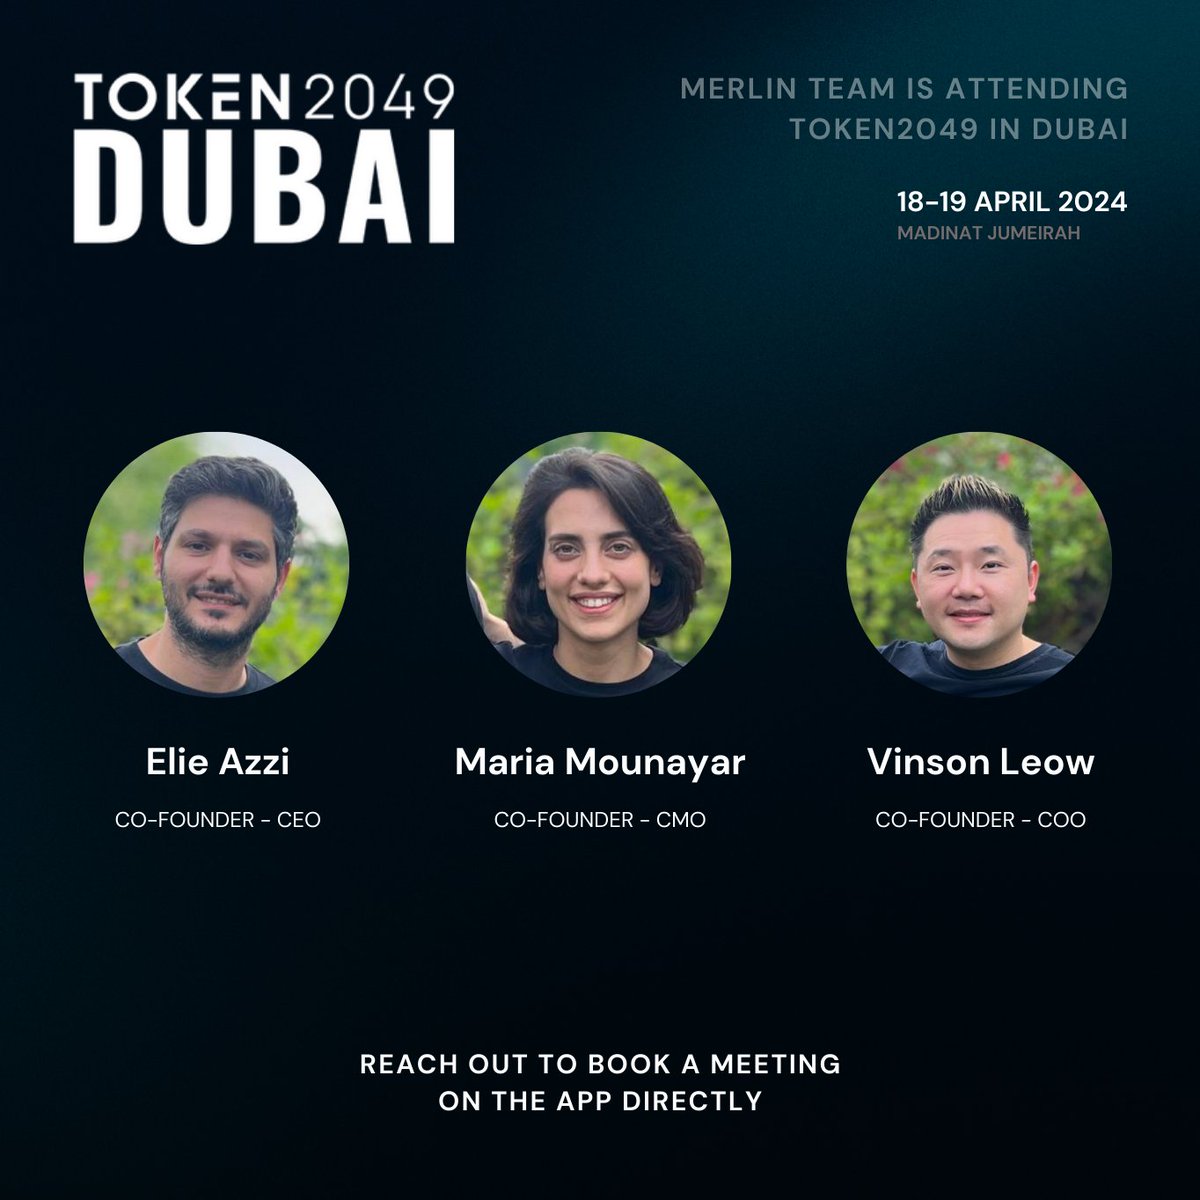 The Merlin team is excited to be in Dubai this week for @token2049 ! Looking forward to meet blockchain enthusiasts, builders, crypto accountants, wallet providers, and funds over at the event tomorrow. Let's connect! Book a meeting with us directly on the Token2049 app.